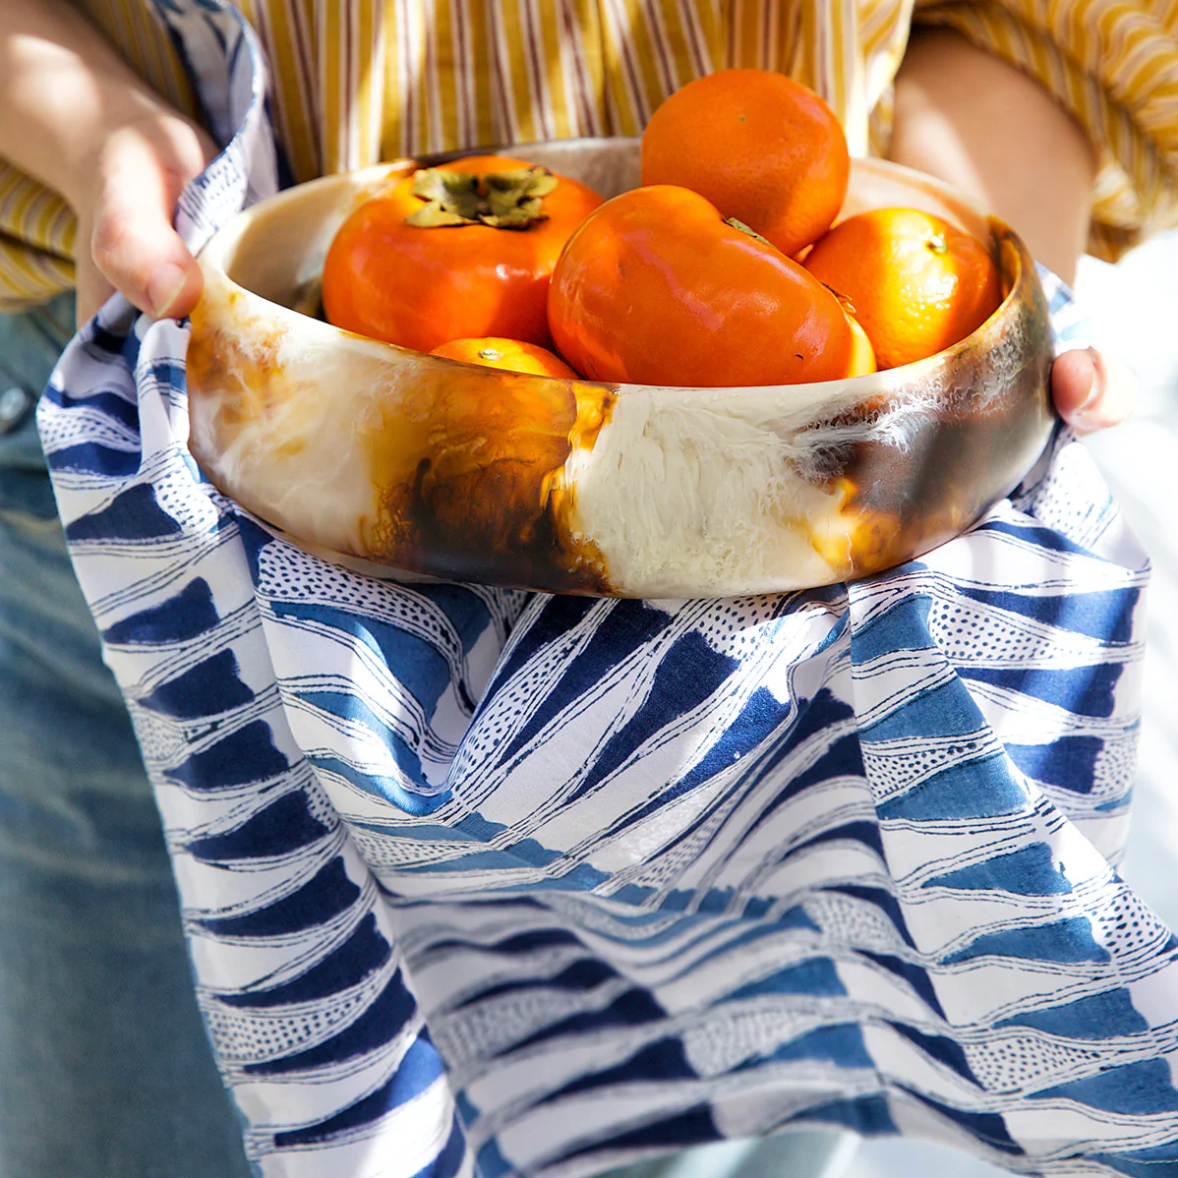 bowl of persimmons with block print napkin